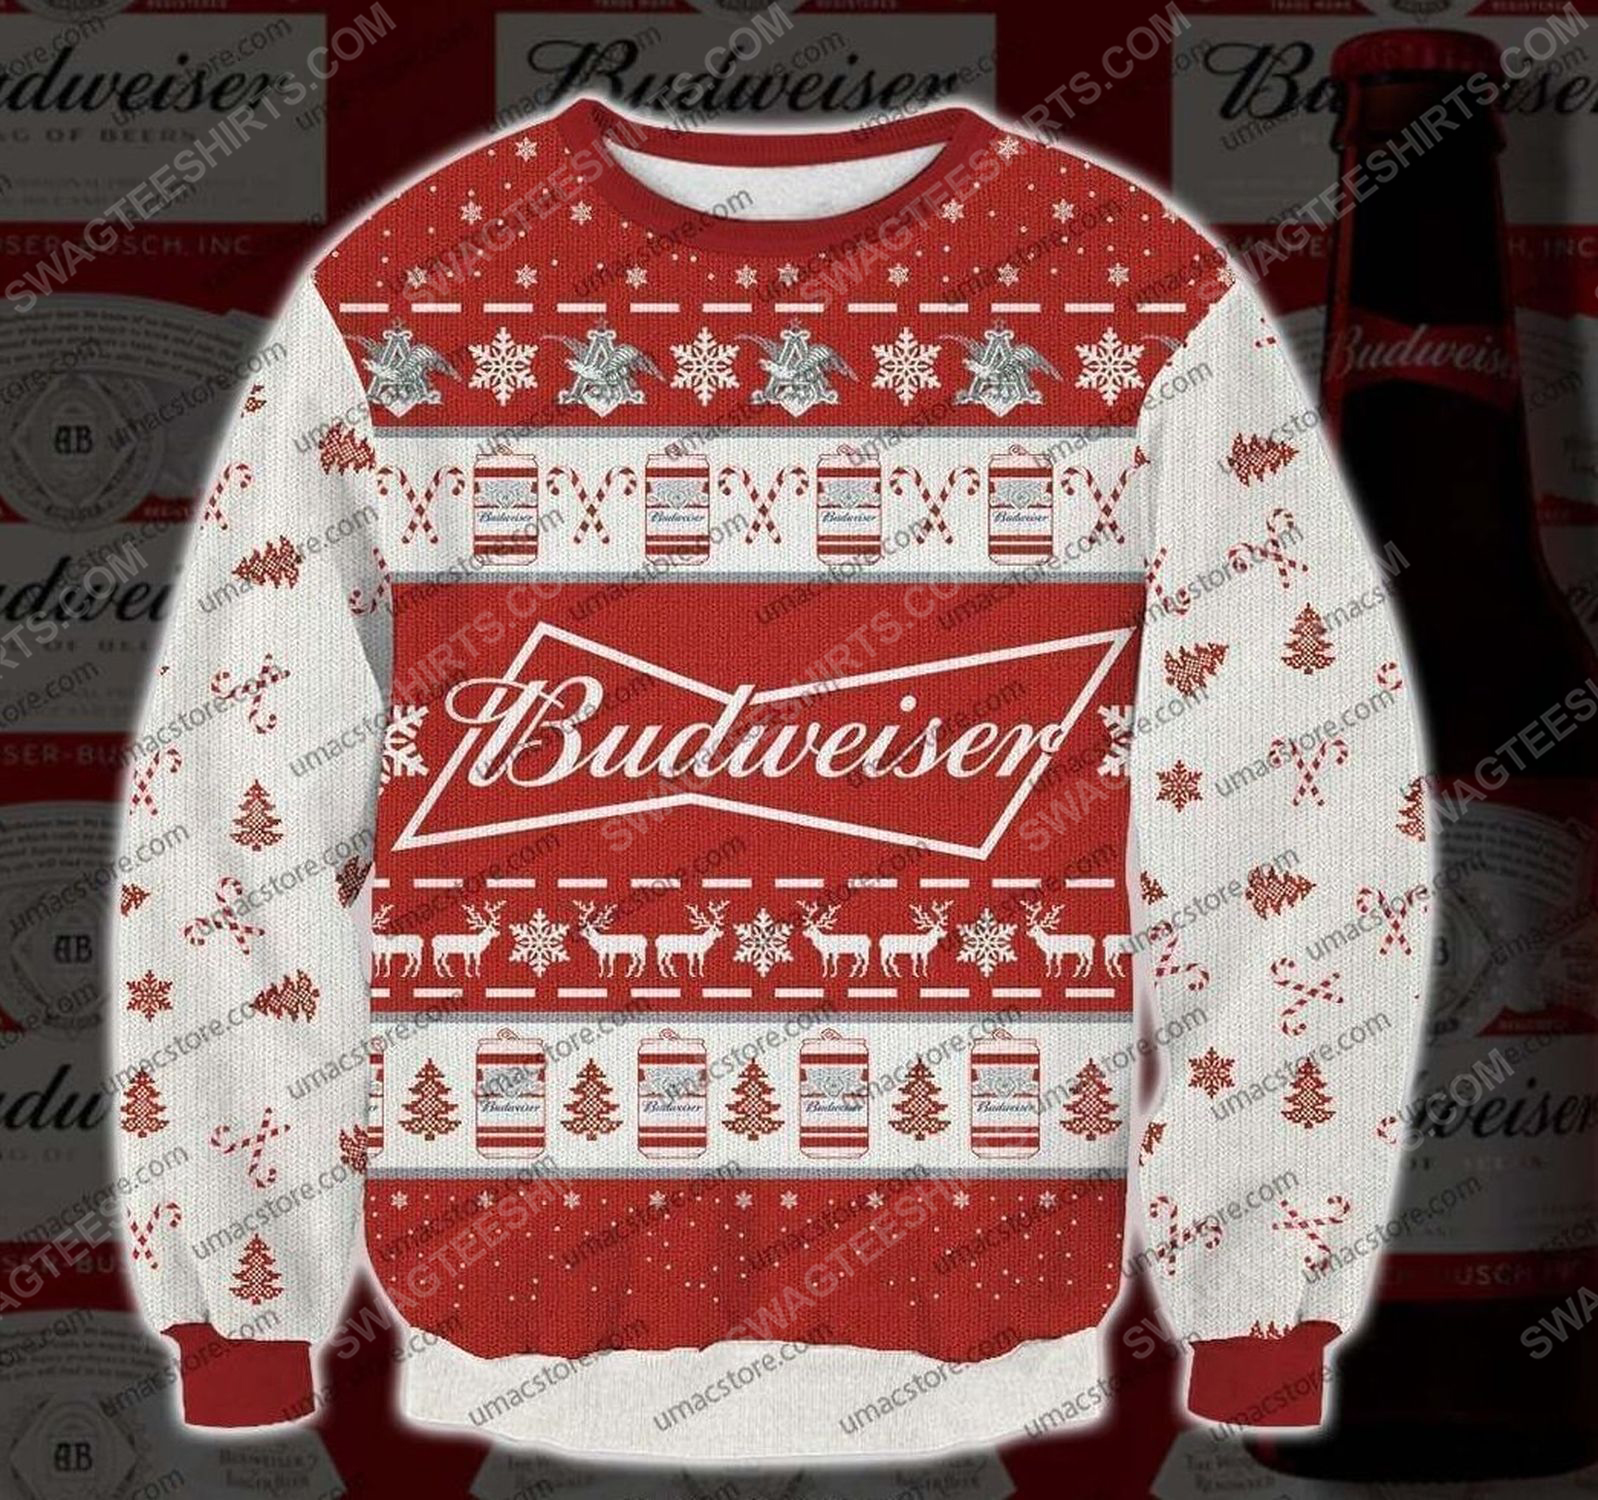 Budweiser beer all over print ugly christmas sweater - Copy (2)